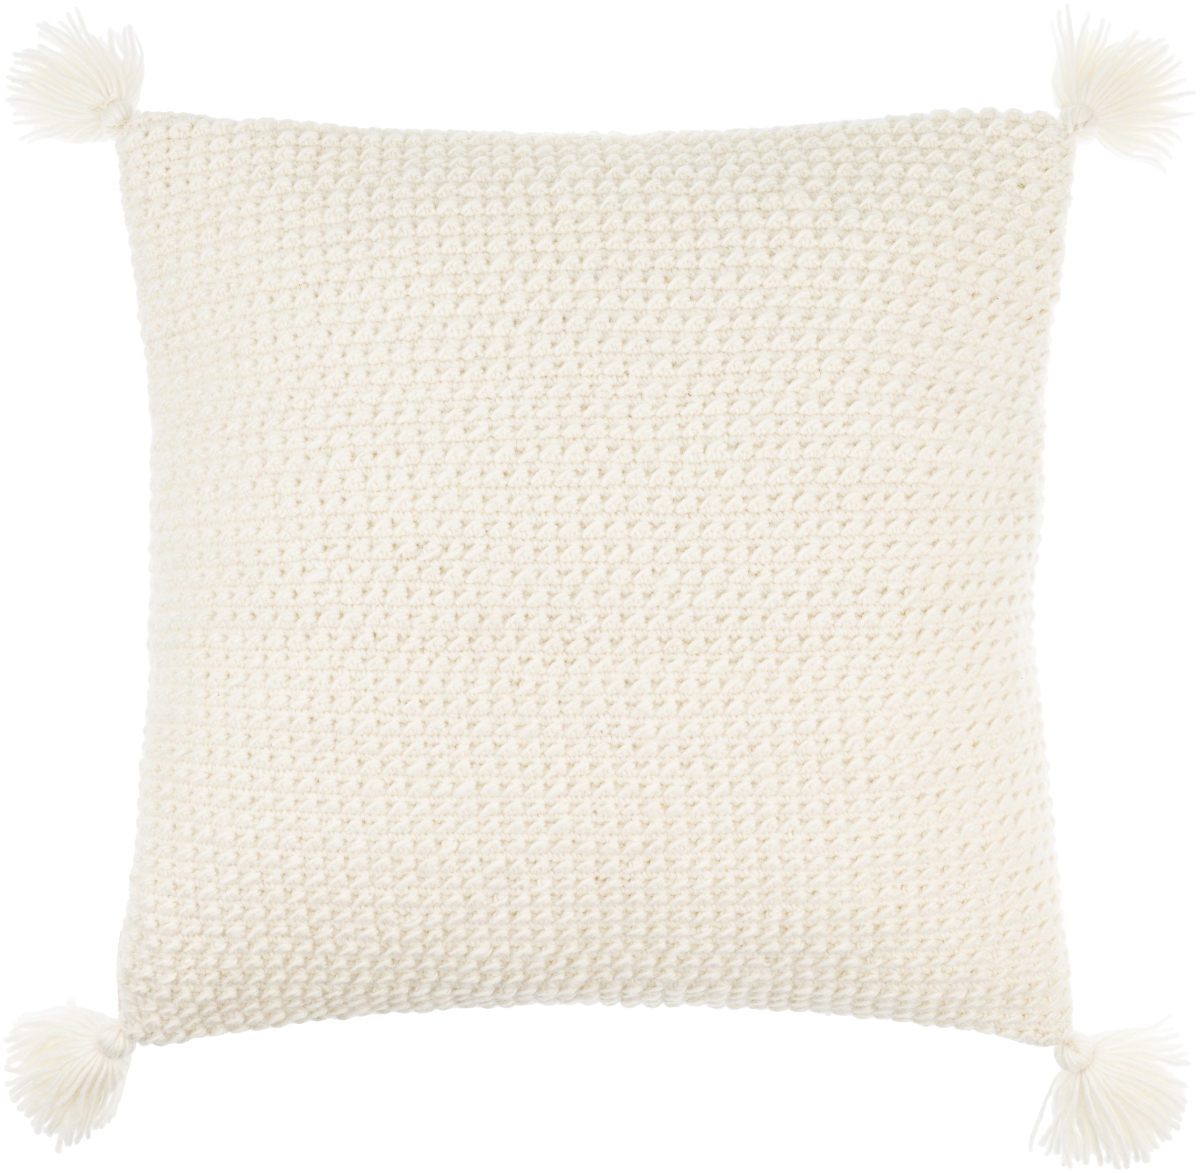 Picture of Livabliss MKO003-2020 20 x 20 in. Makrome Square Pillow Cover